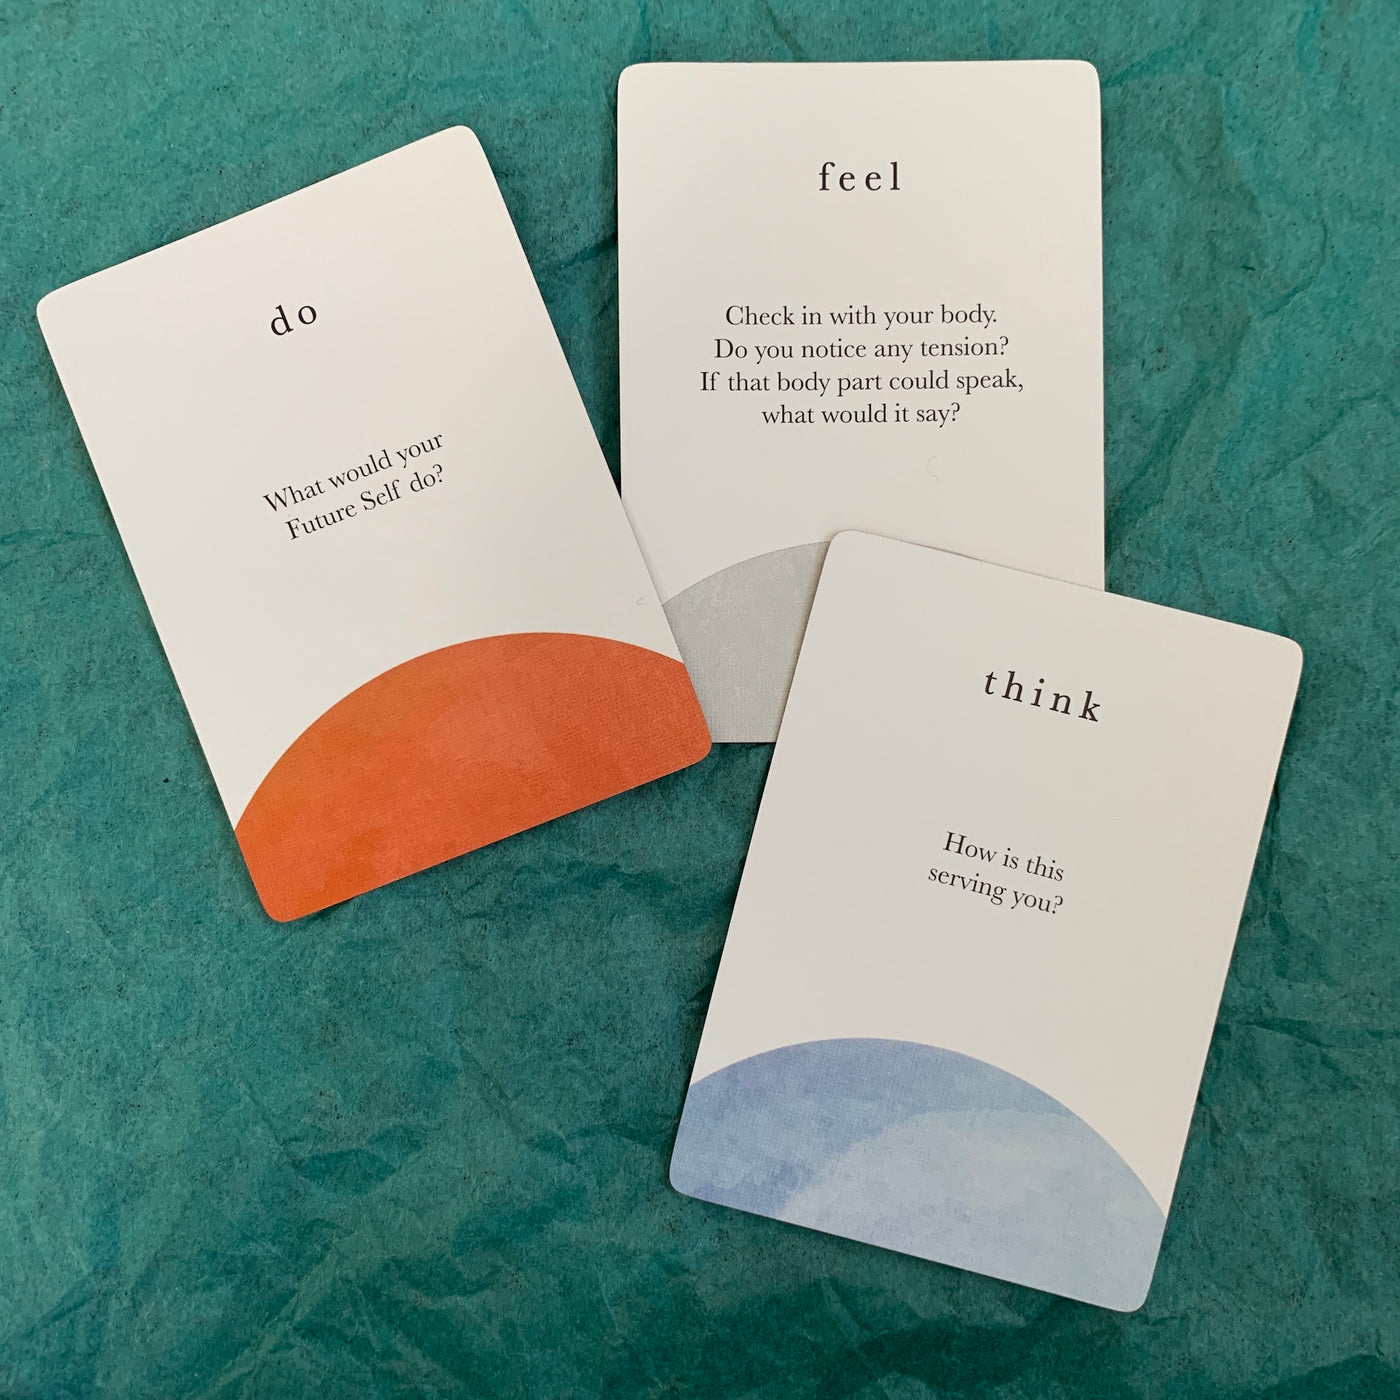 Three cards from the compass cards deck representing the think, feel and do categories